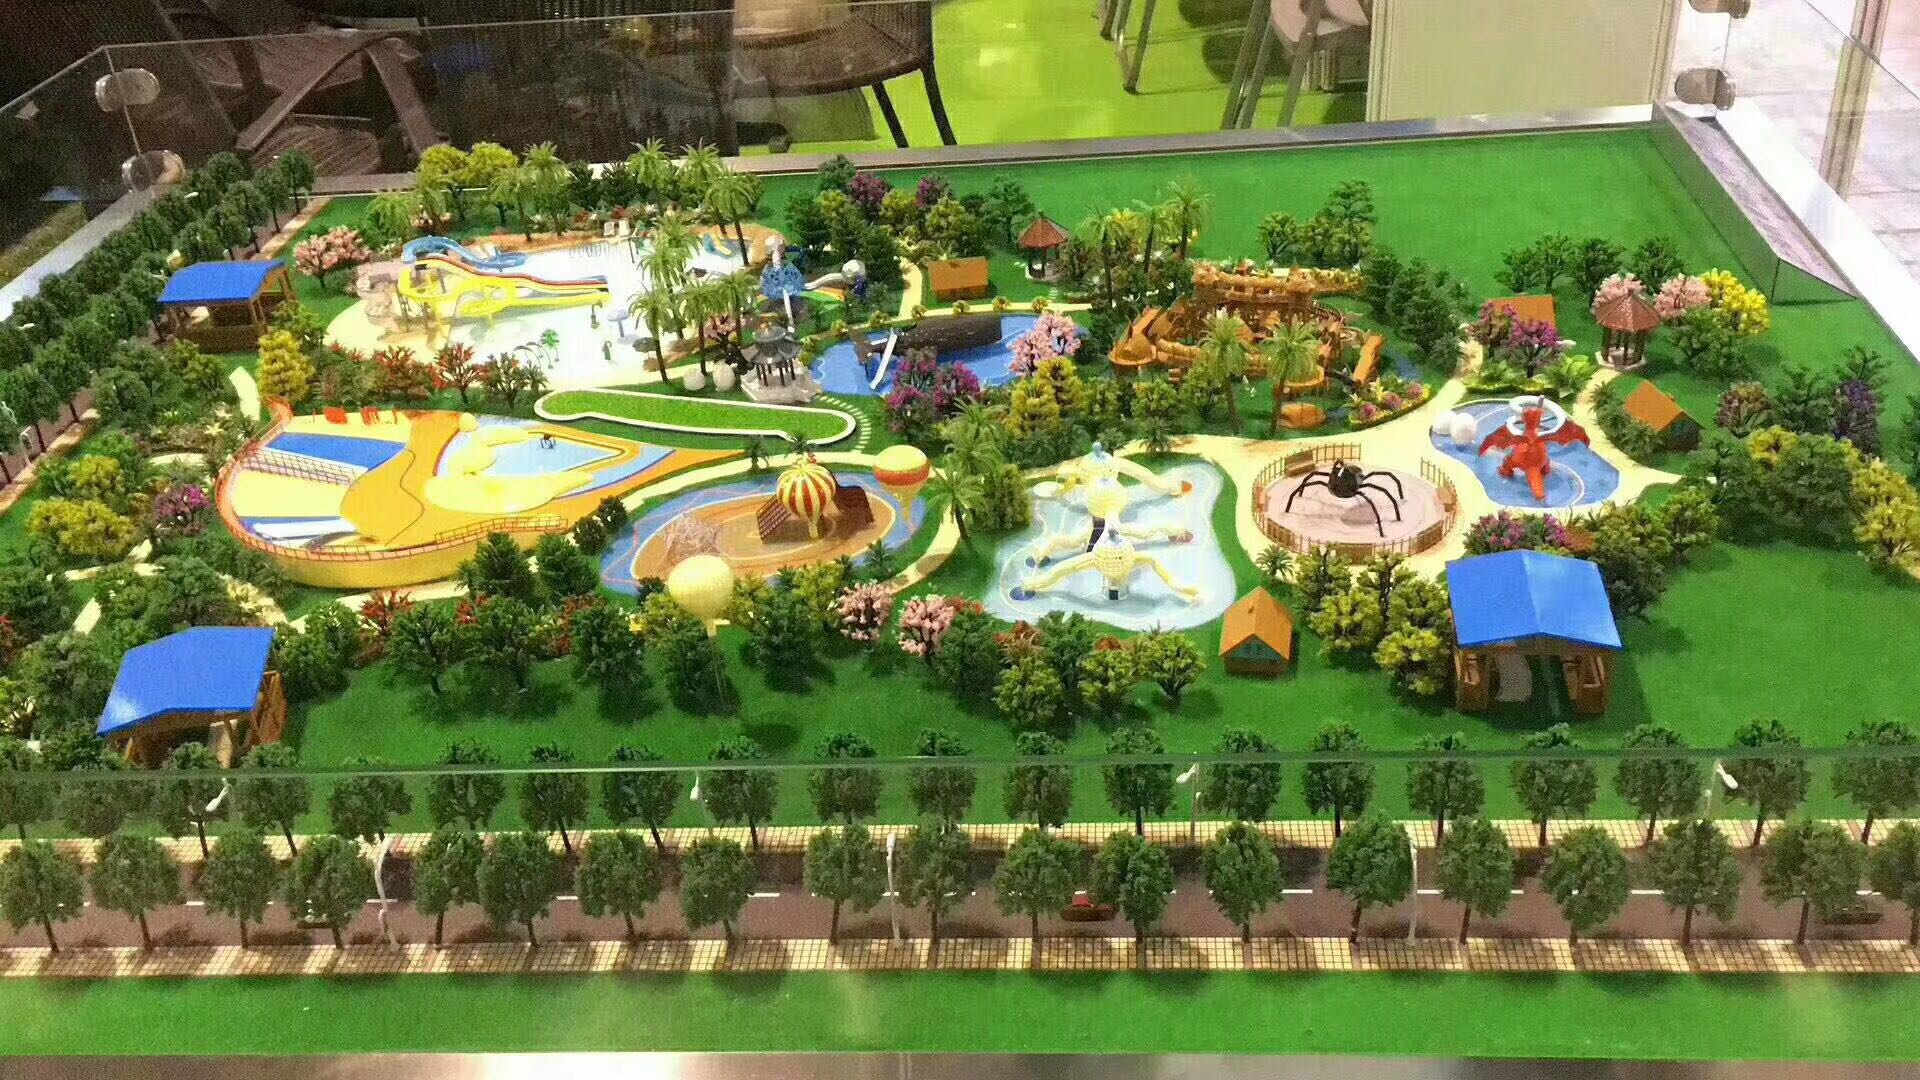 Exhibition 2018.5-29-5-31 in Shanghai: The green&Landscaping exhibition.